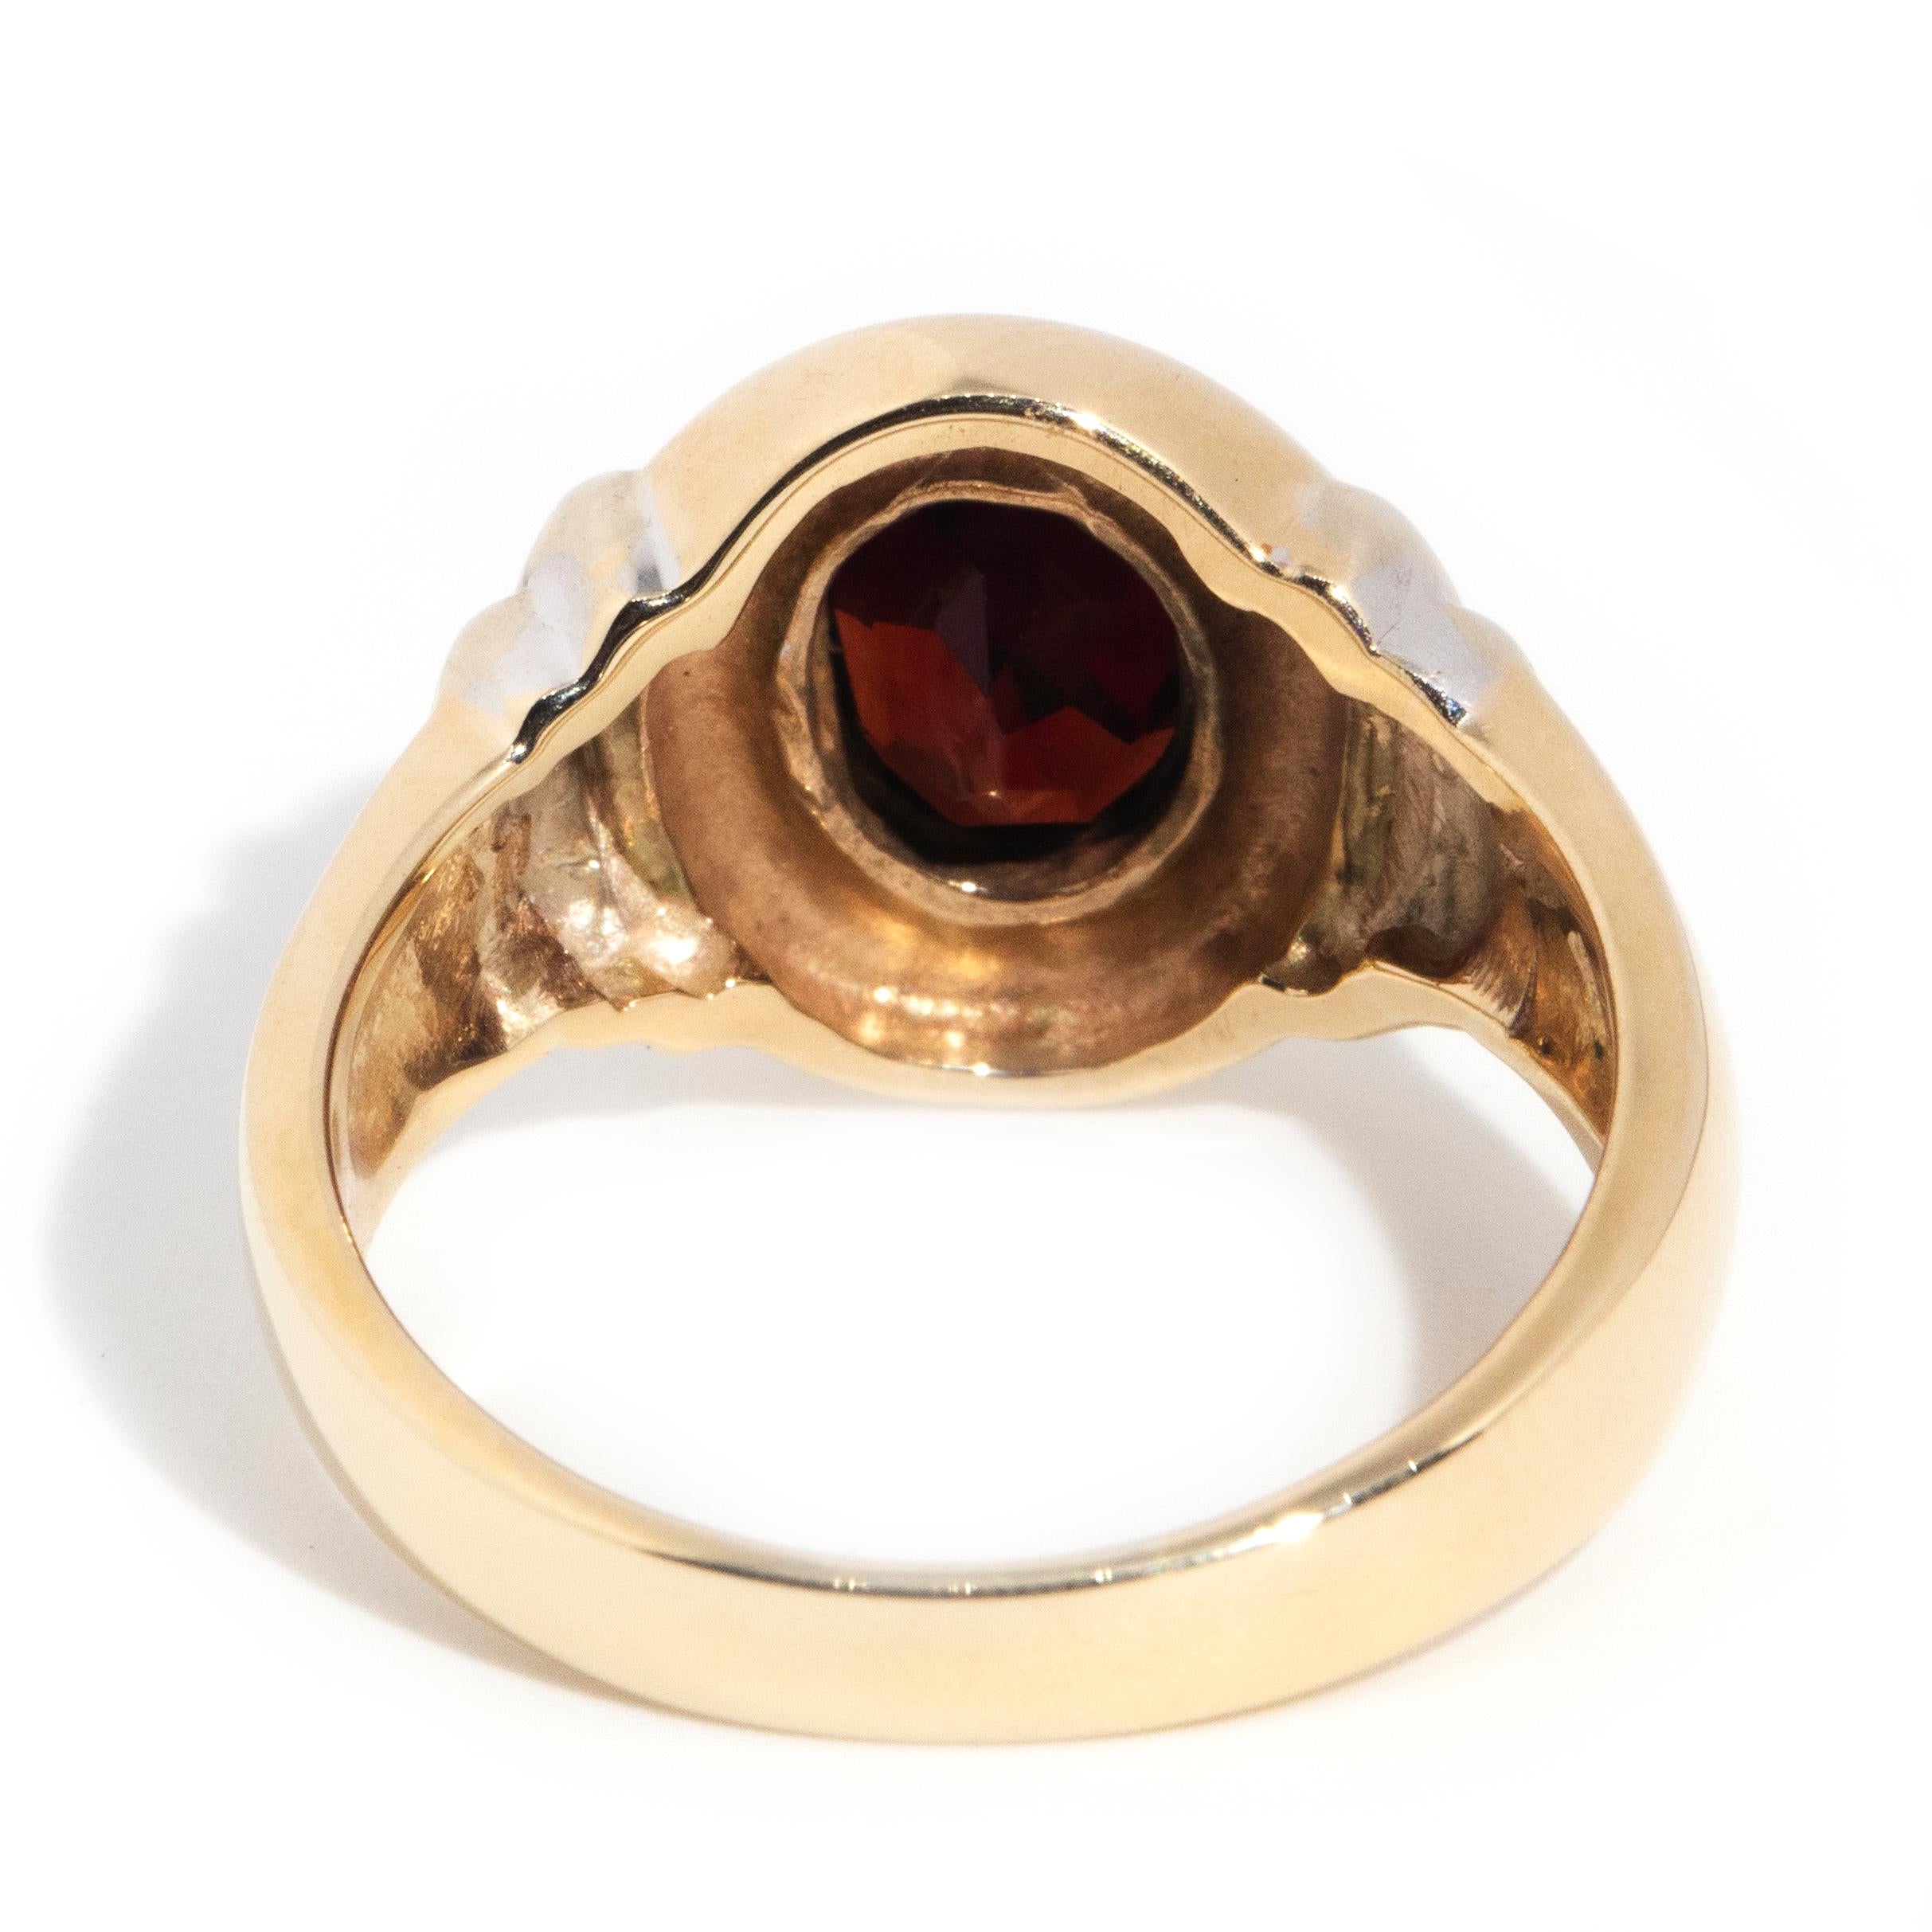 circa 1990s, Vintage 9 Carat Yellow Gold Double Rub over Oval Cut Garnet Ring For Sale 5